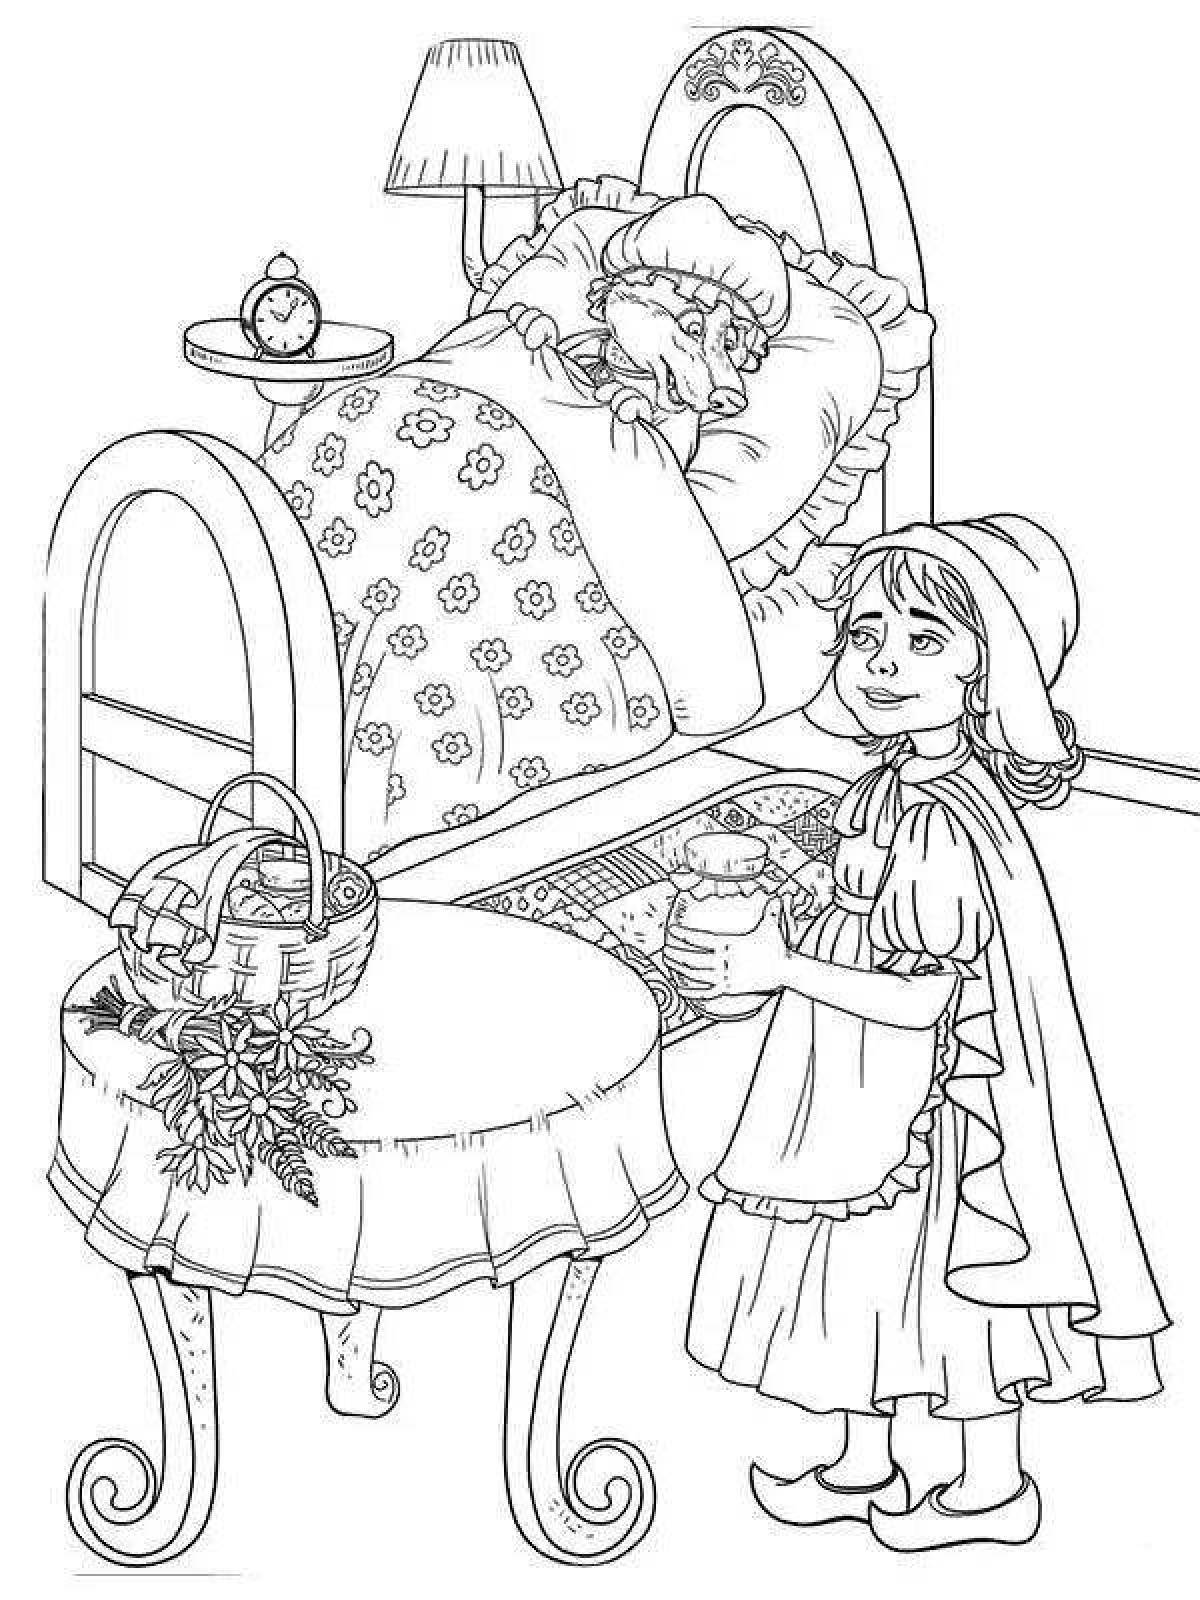 Violent charles perrault little red riding hood coloring book